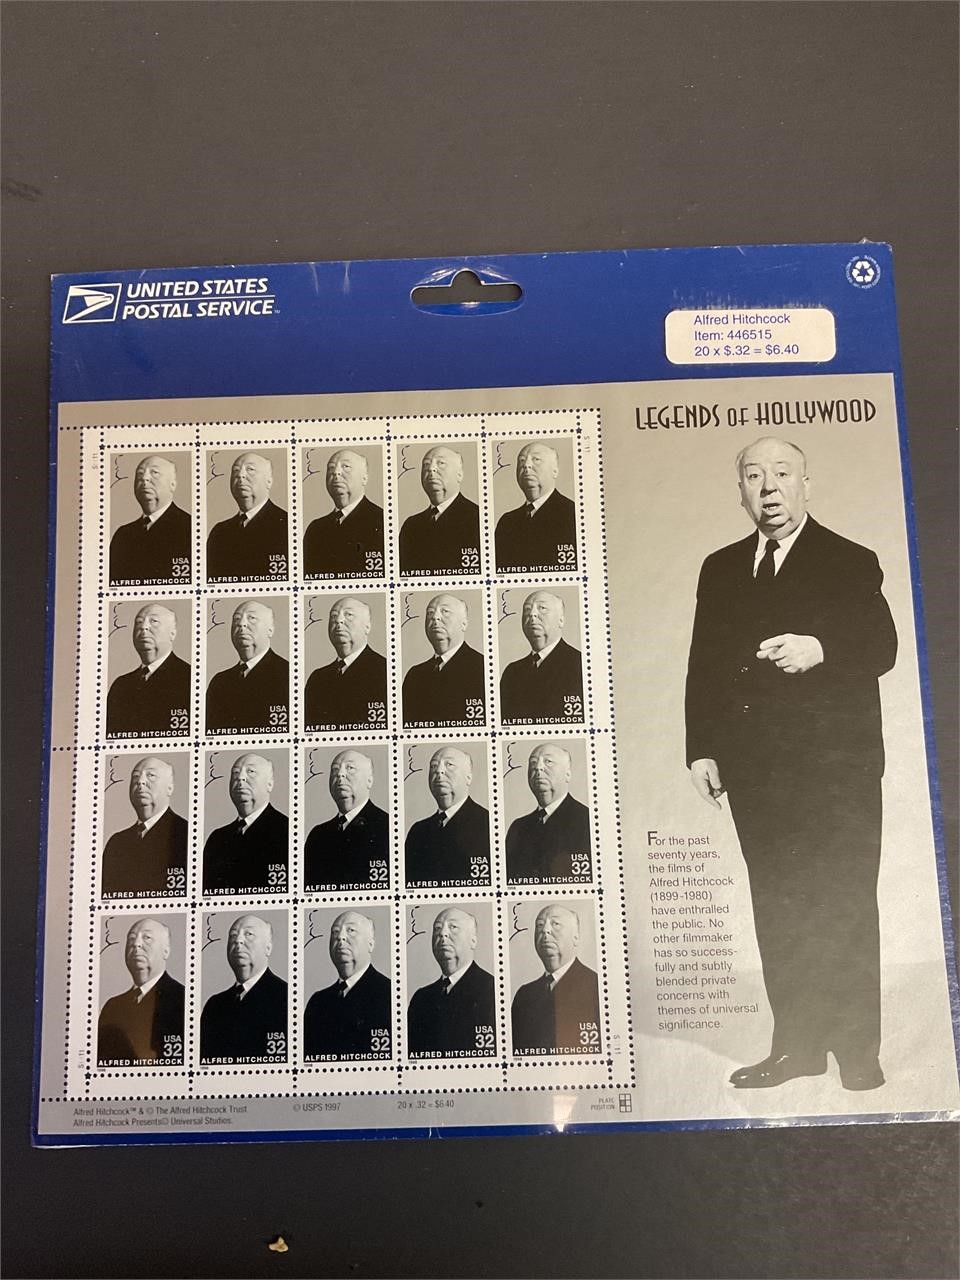 Alfred Hitchcock stamps